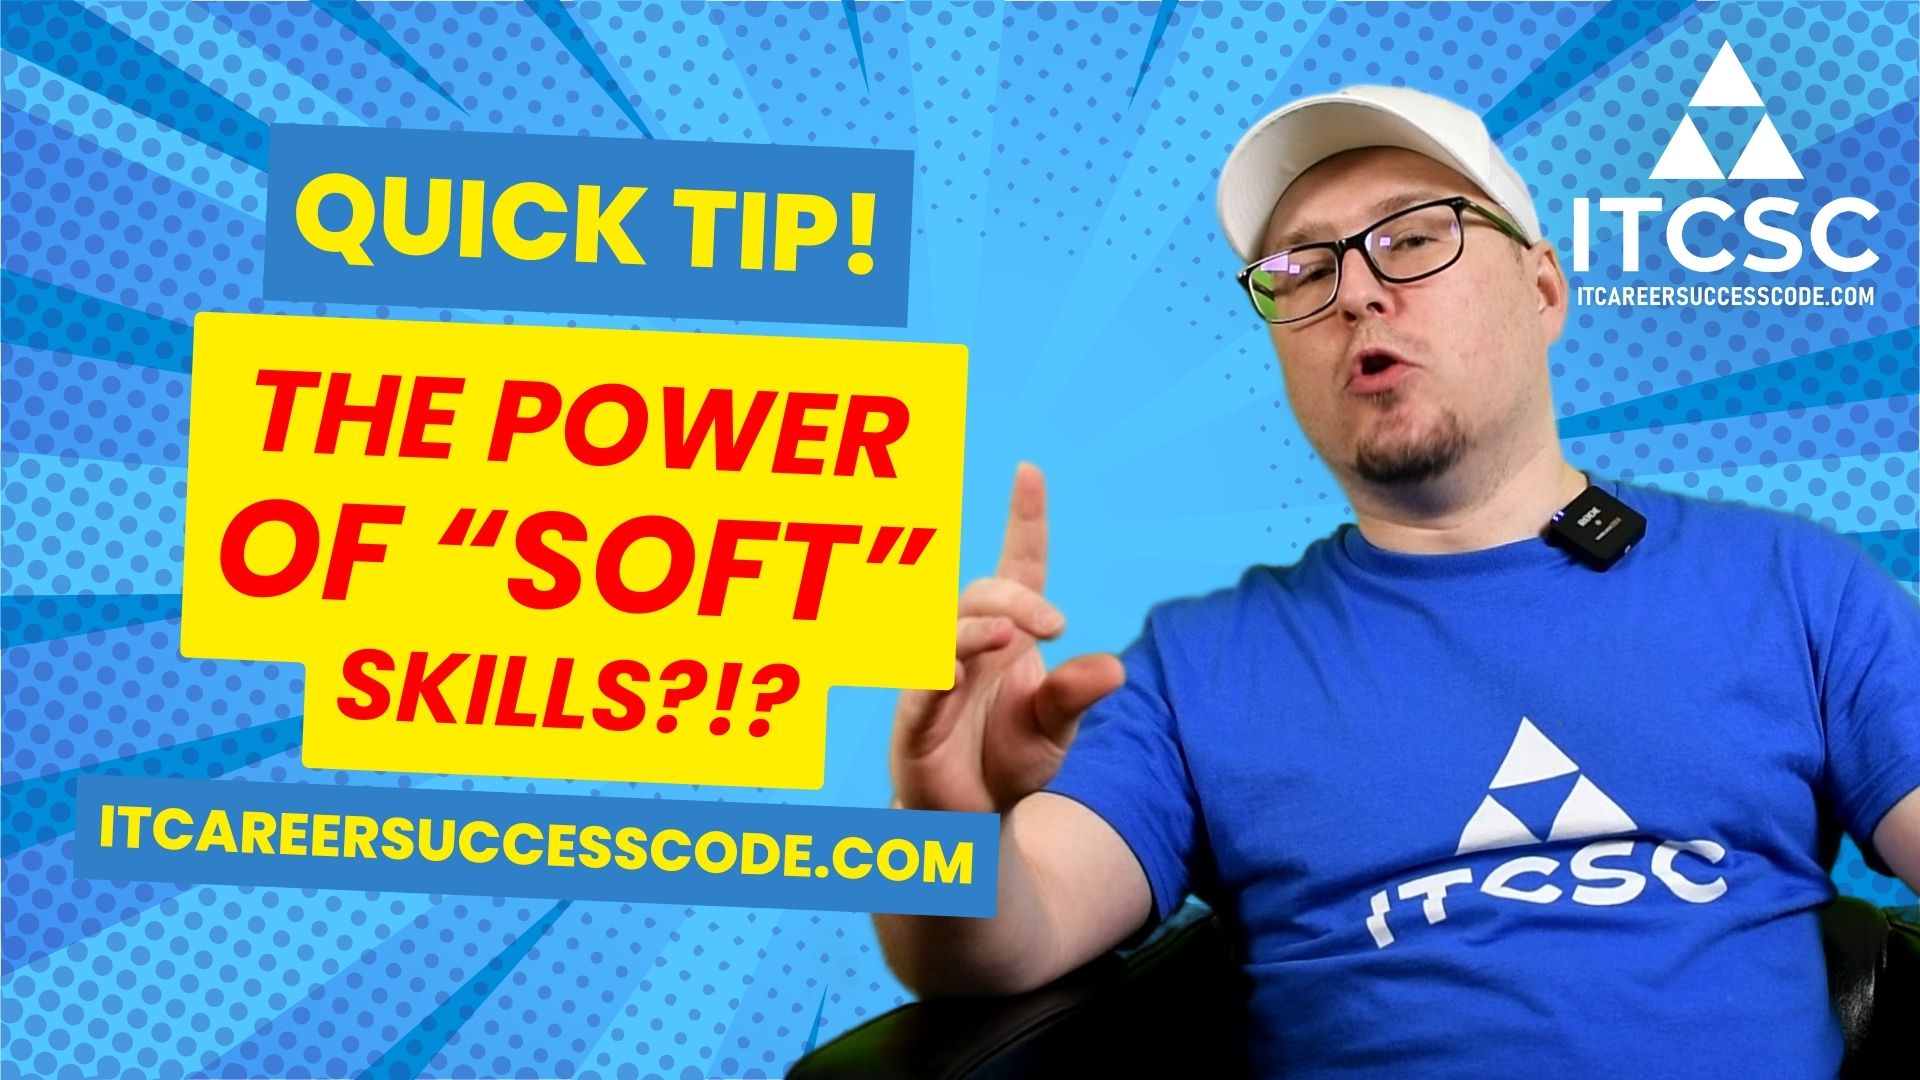 The Power of Soft Skills on Your IT Career!